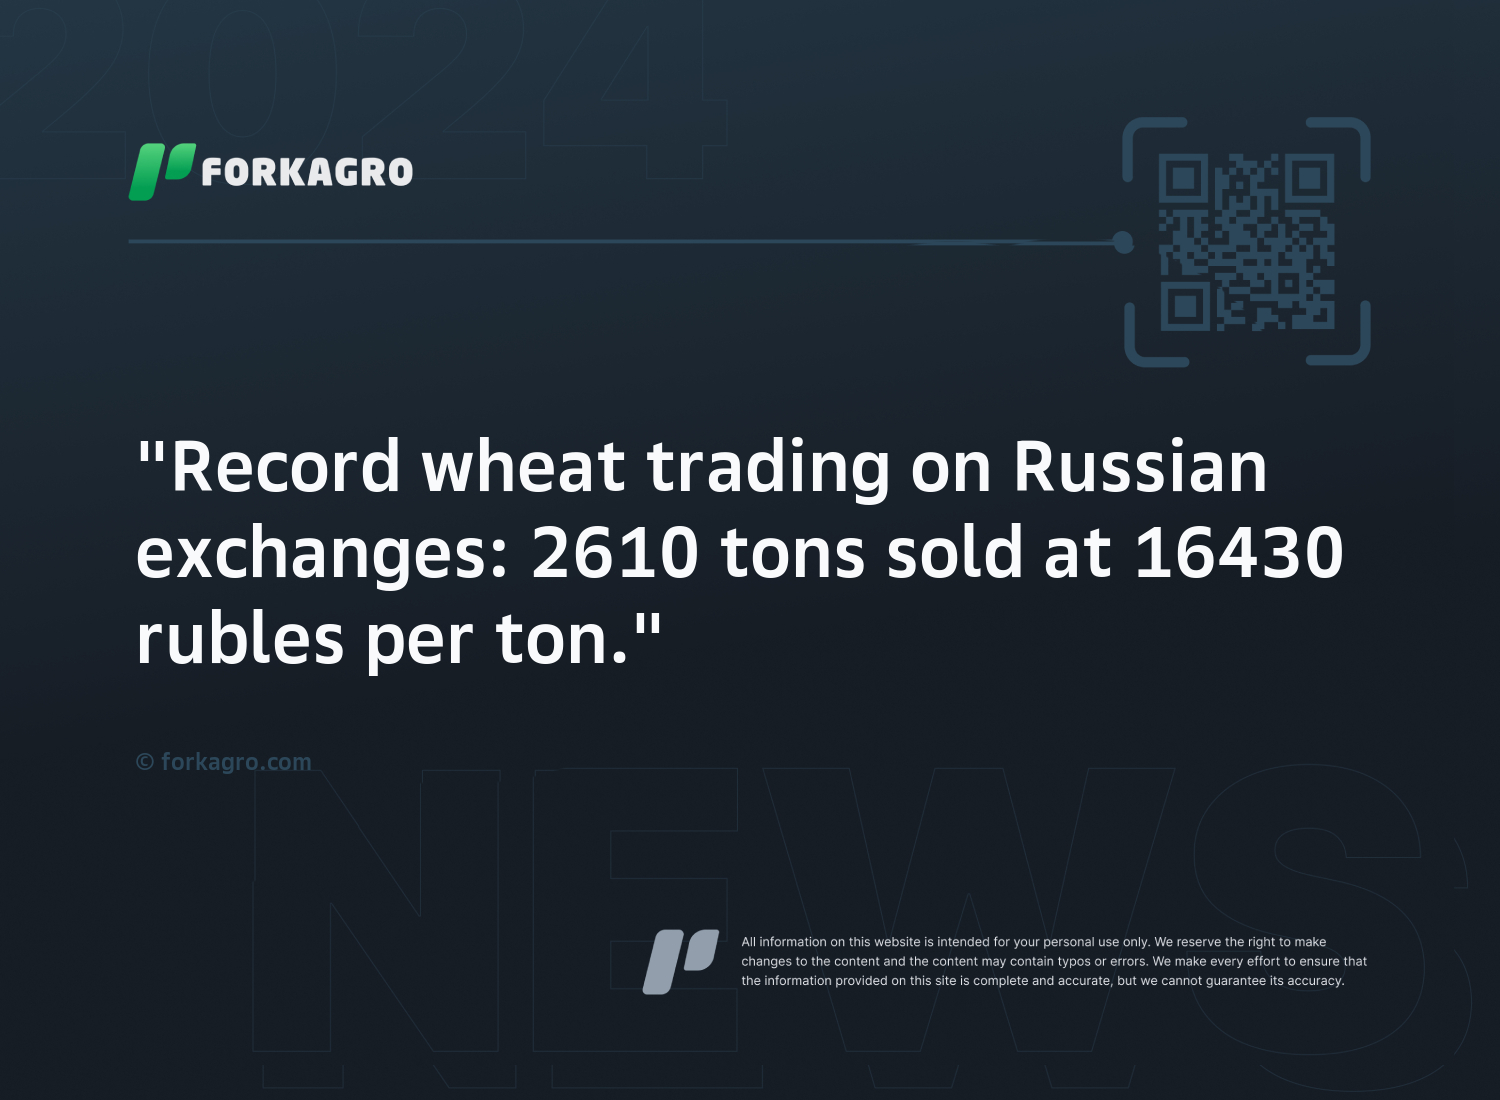 "Record wheat trading on Russian exchanges: 2610 tons sold at 16430 rubles per ton."